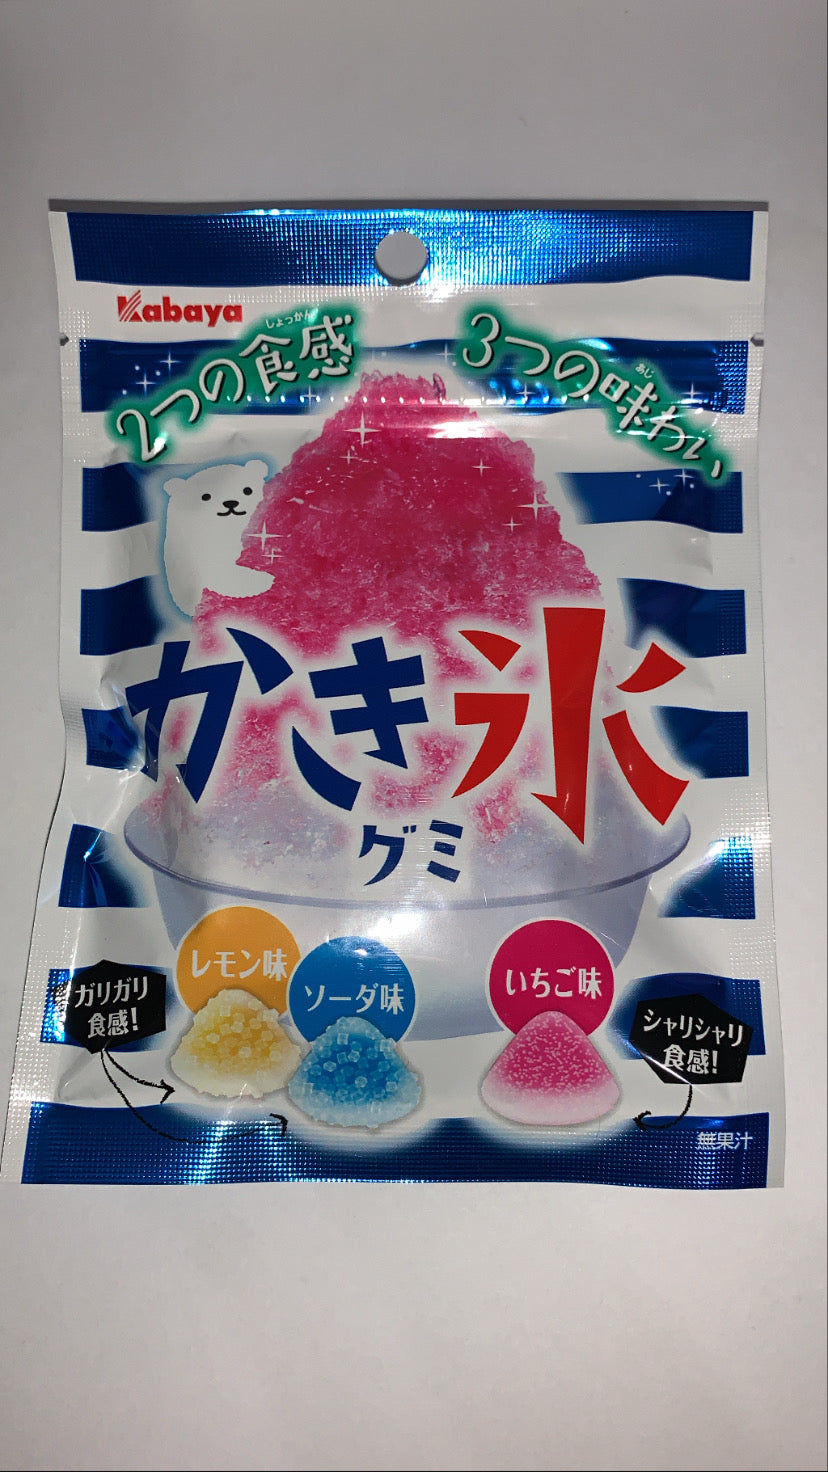 Fruit shaved ice candy (Japan)